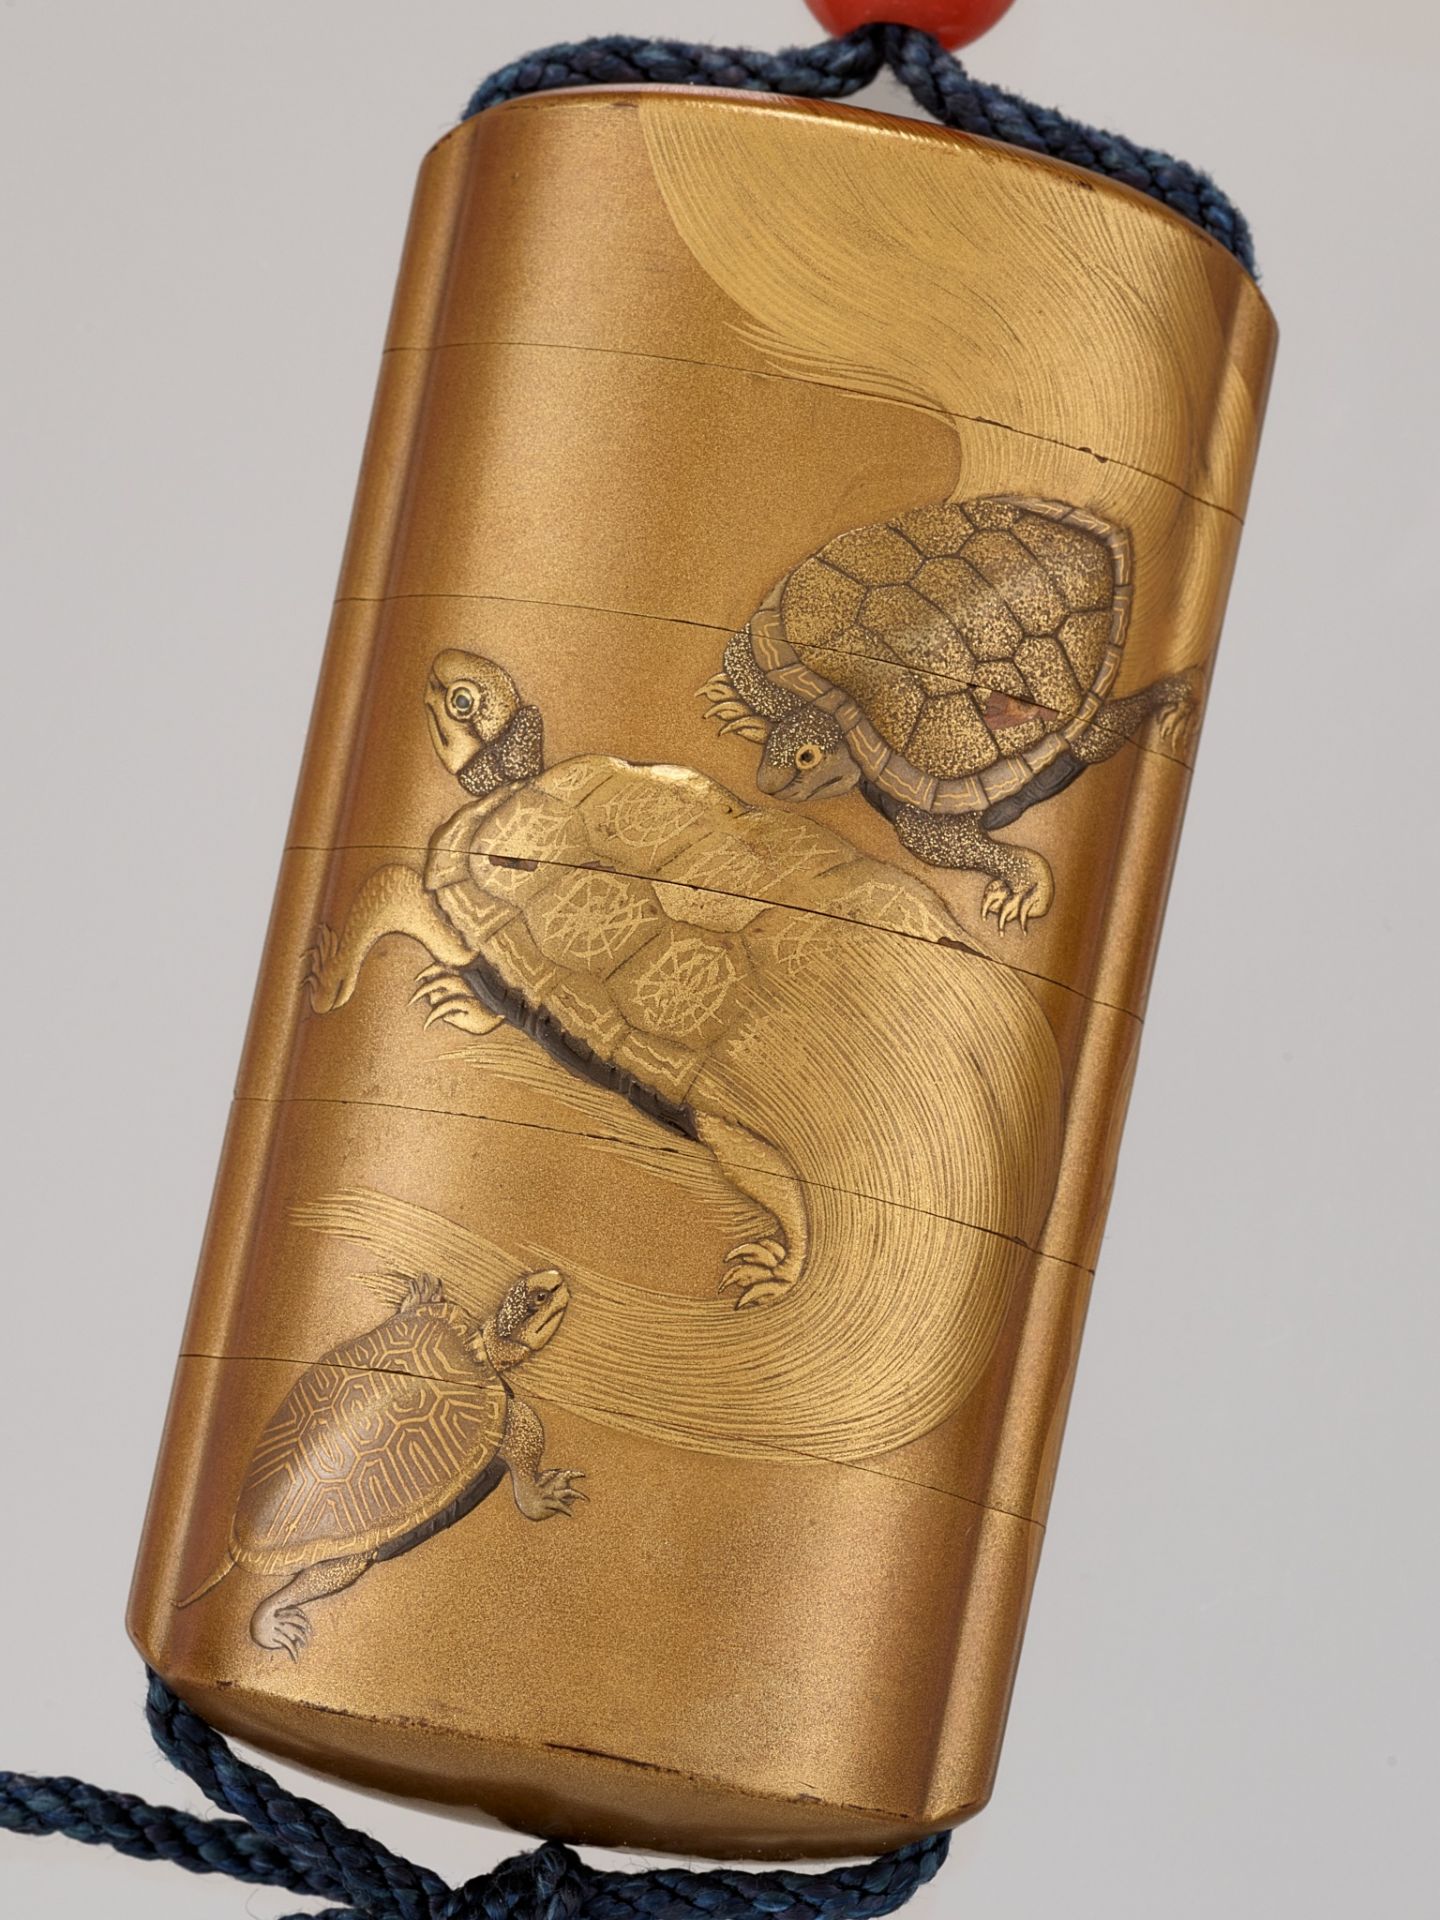 KAJIKAWA: A SUPERB FIVE-CASE GOLD LACQUER INRO WITH MINOGAME DESIGN AND WITH EN SUITE NETSUKE - Image 2 of 8